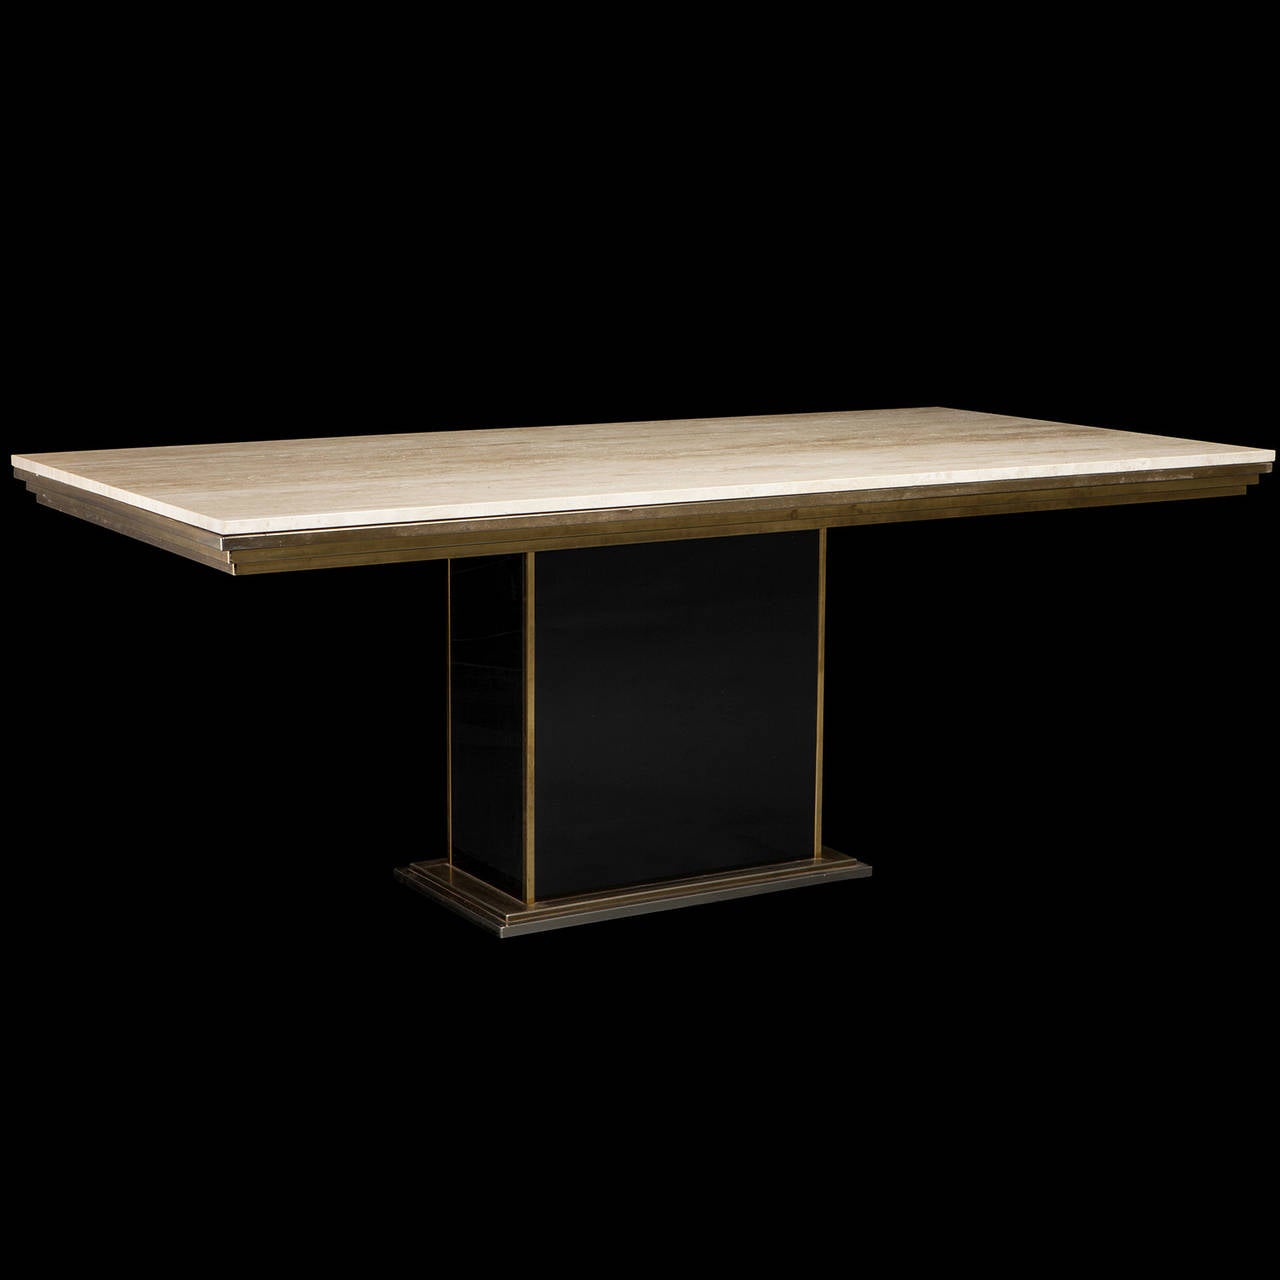 Solid travertine top on brass and black base. Made by Belgo Chrome.